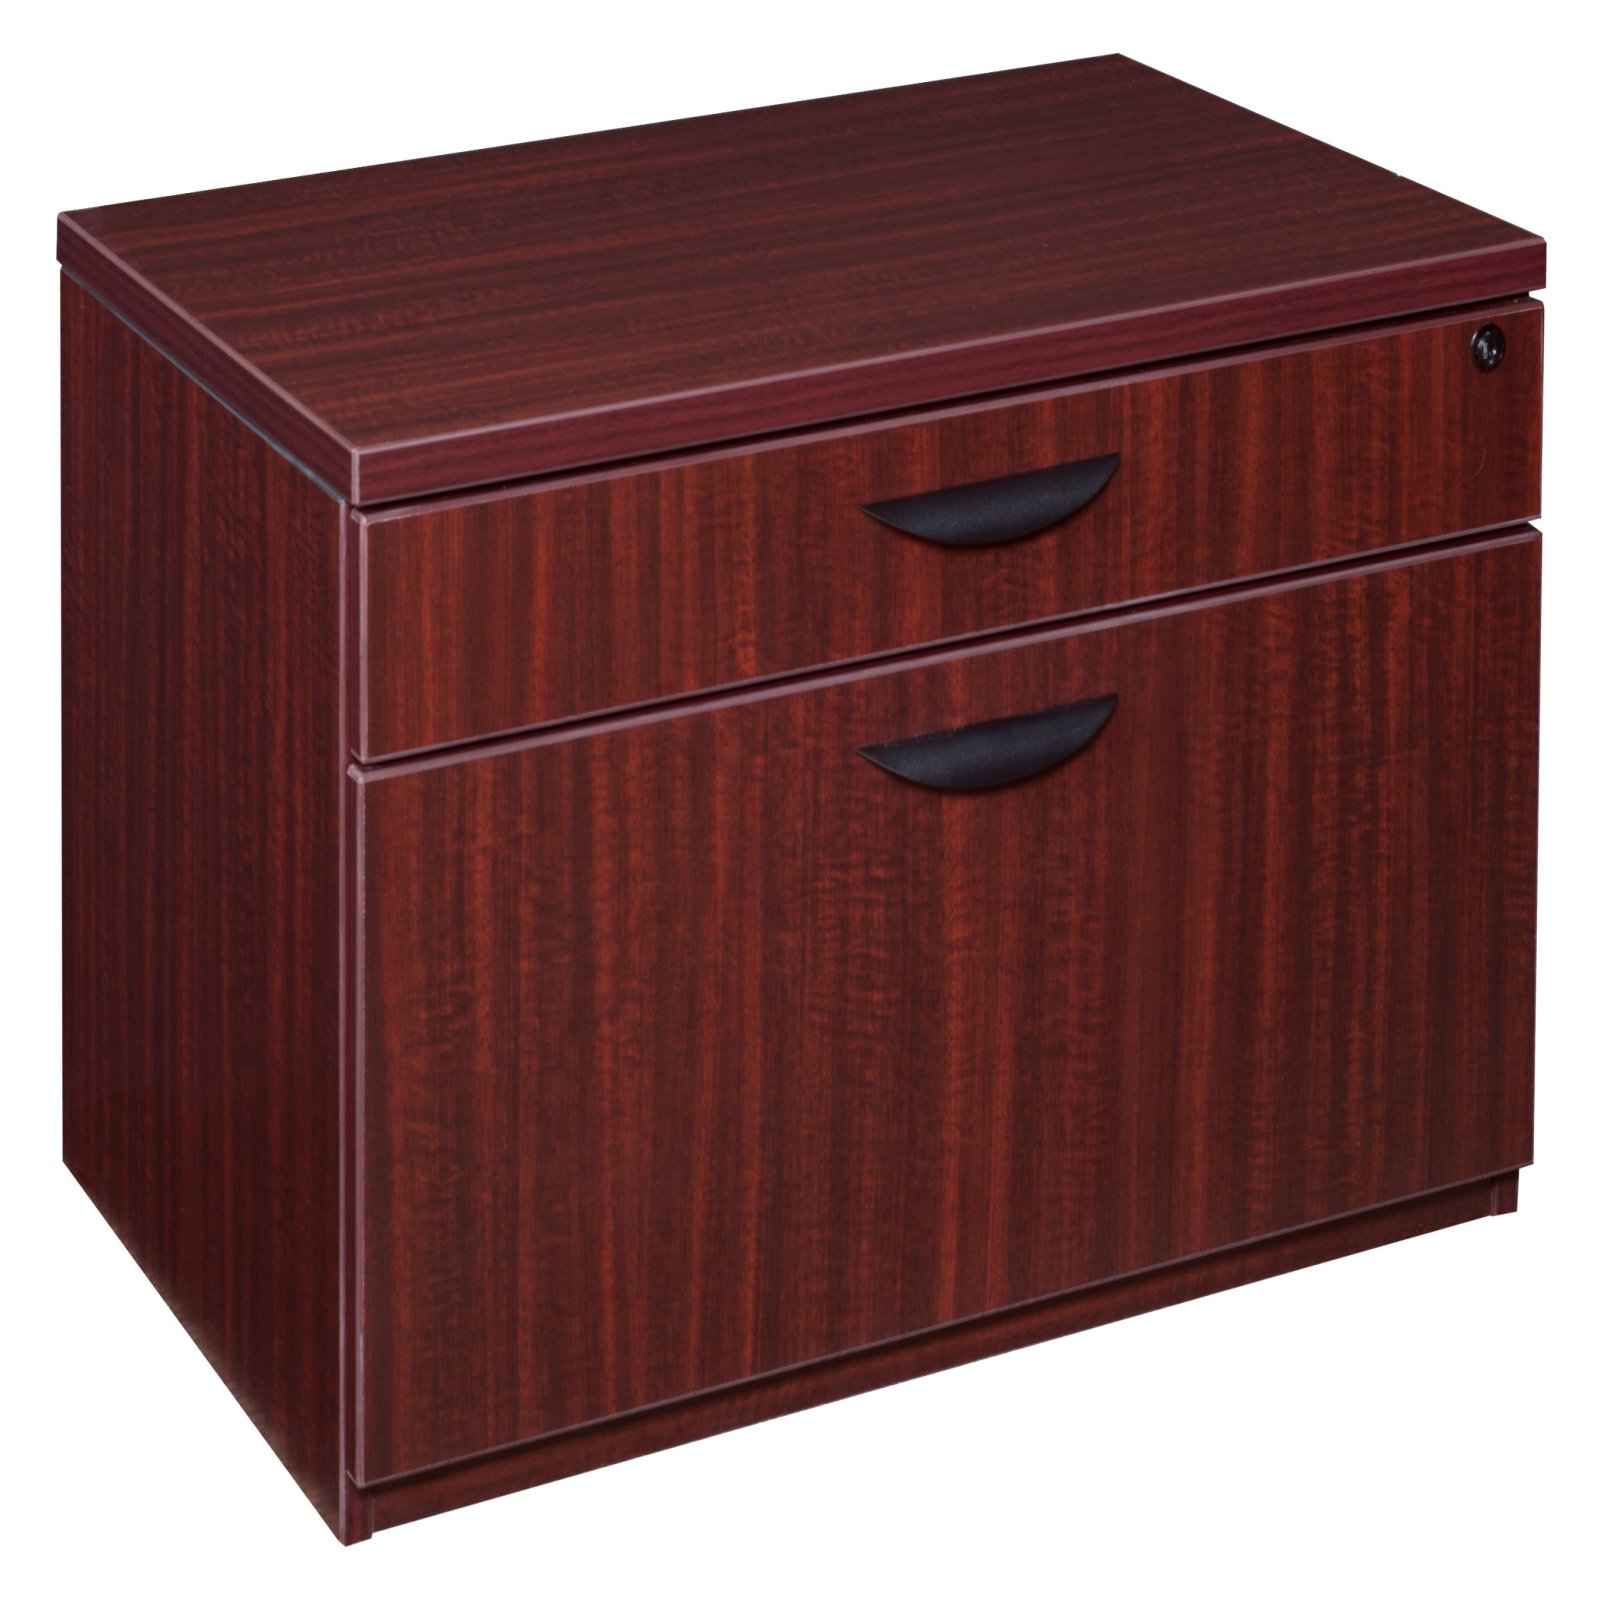 Regency Legacy 20 in. 2 Drawer Low Lateral File- Mahogany - image 2 of 7